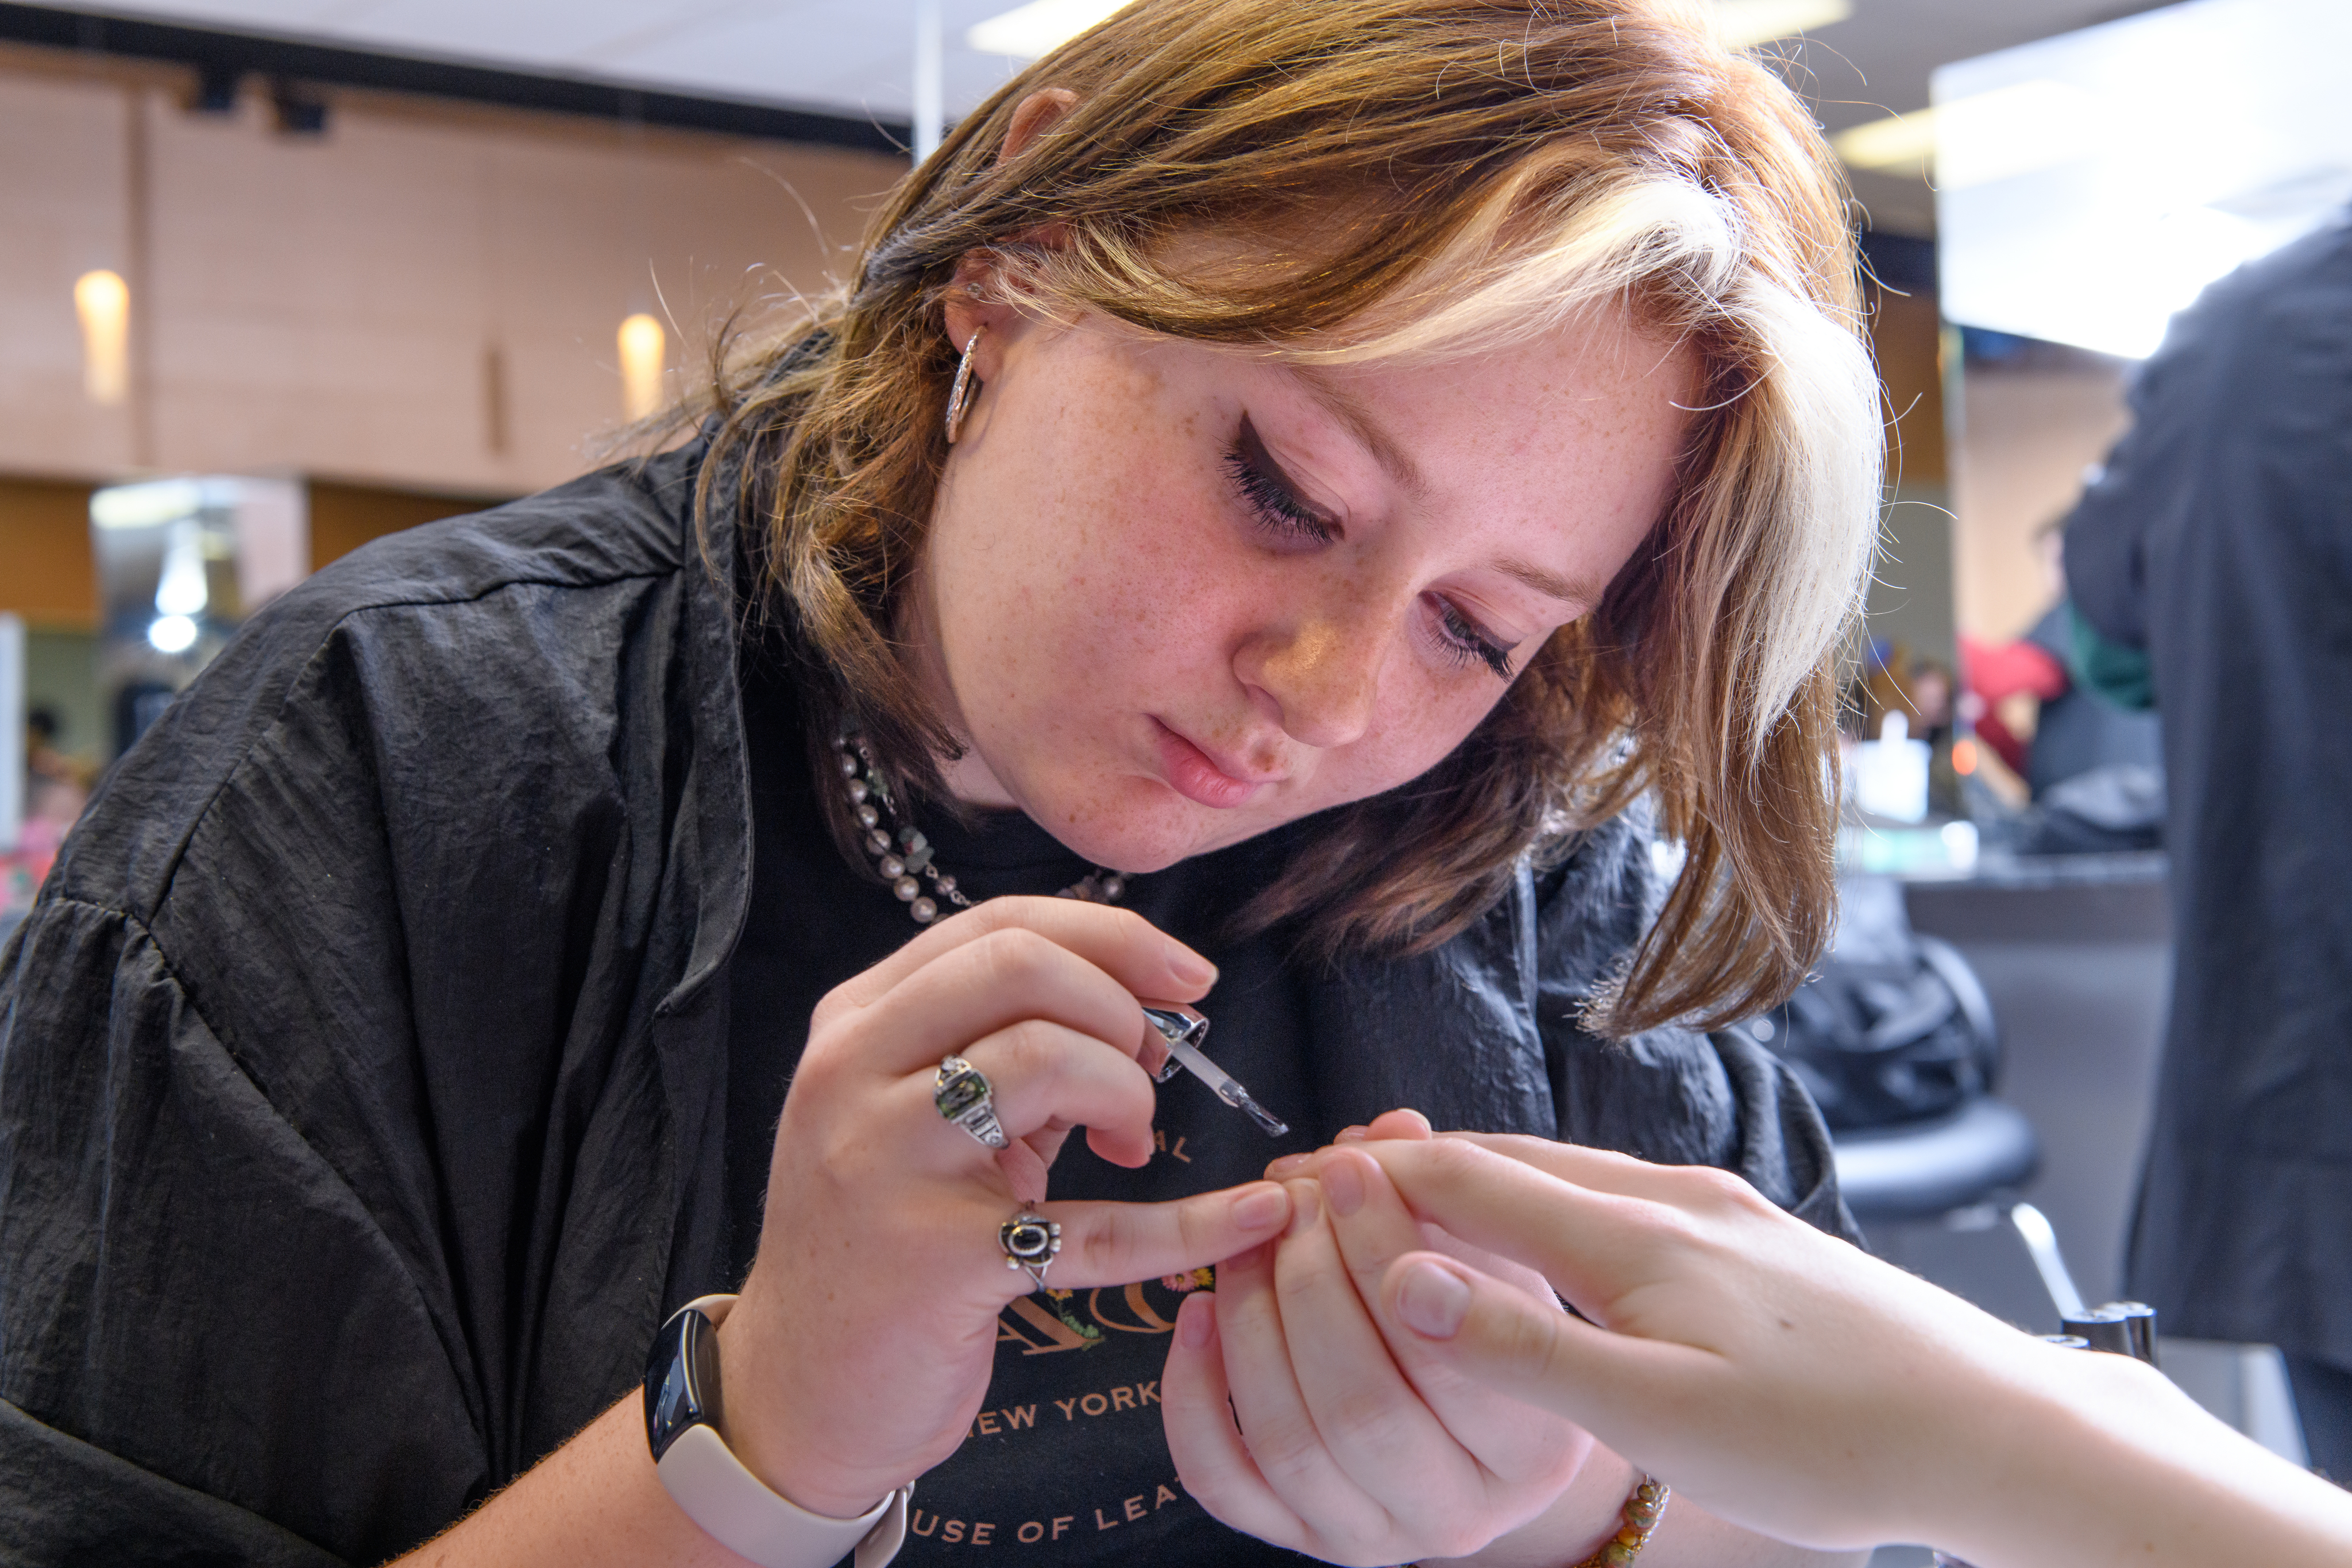 Manicuring student paints the nails of a customer in the salon.